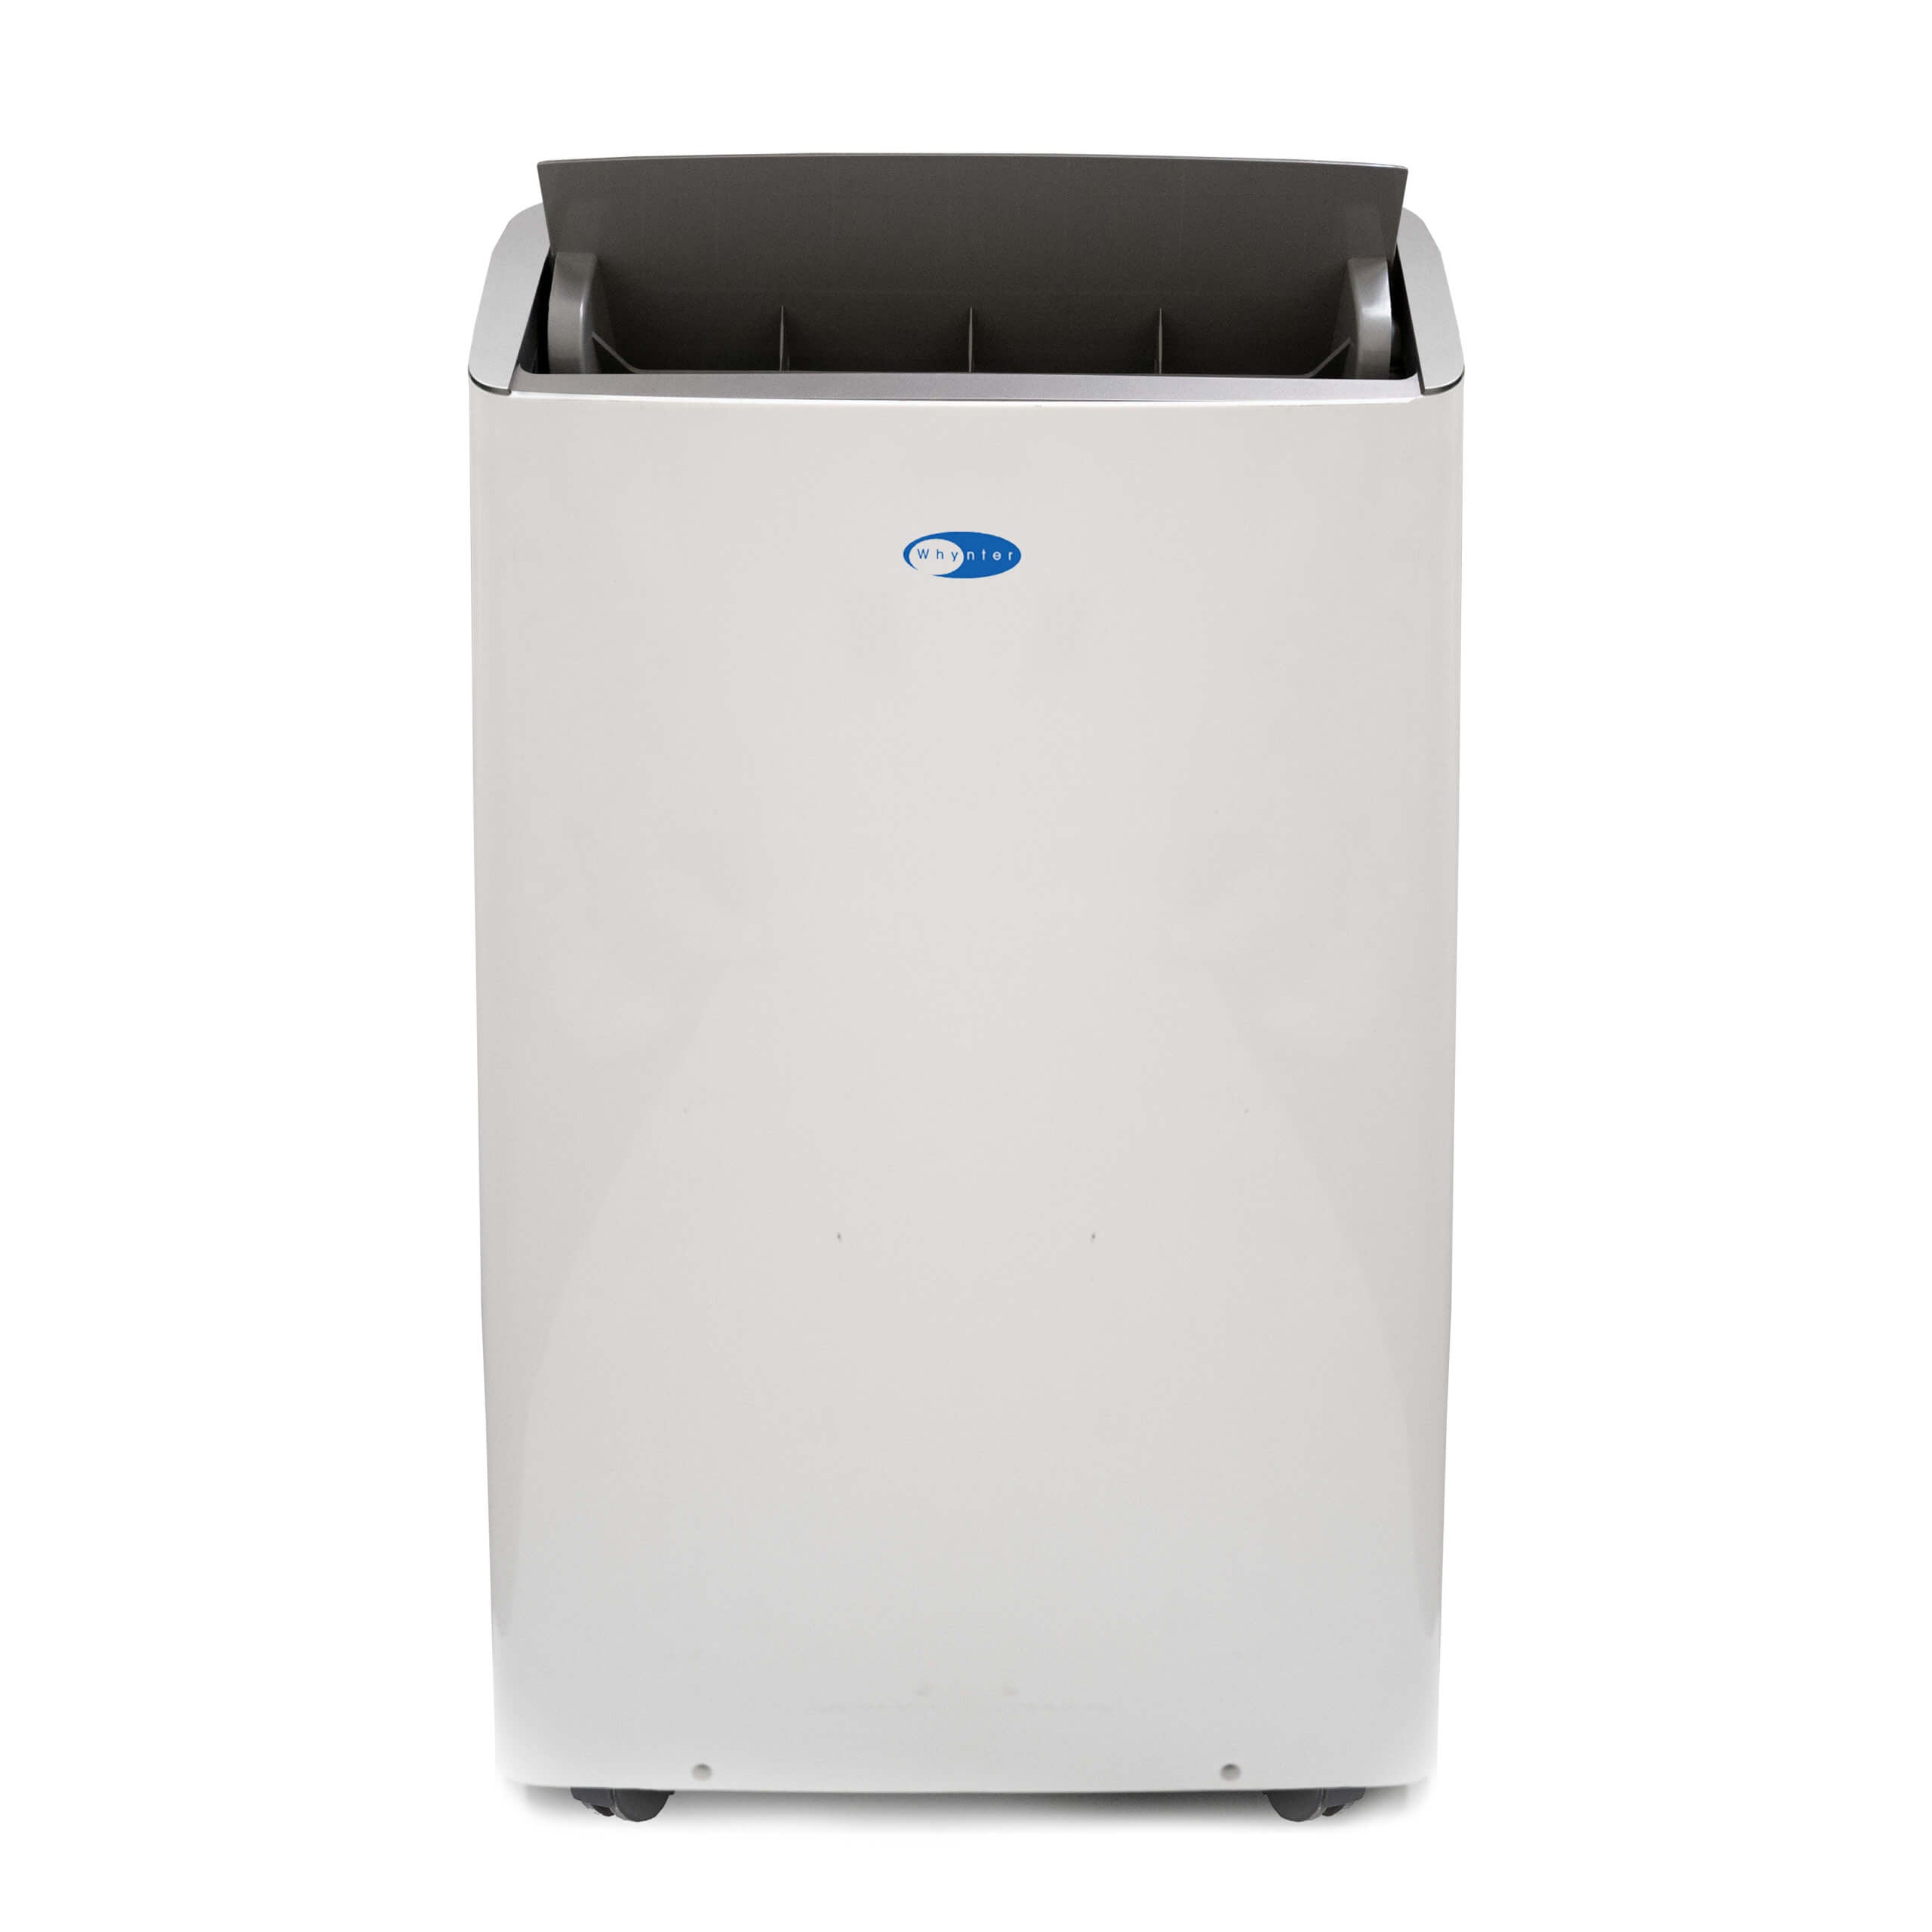 Whynter, Whynter ARC-1230WN 12,000 BTU SACC in White Inverter Dual Hose Portable Air Conditioner with Smart Wi-Fi New